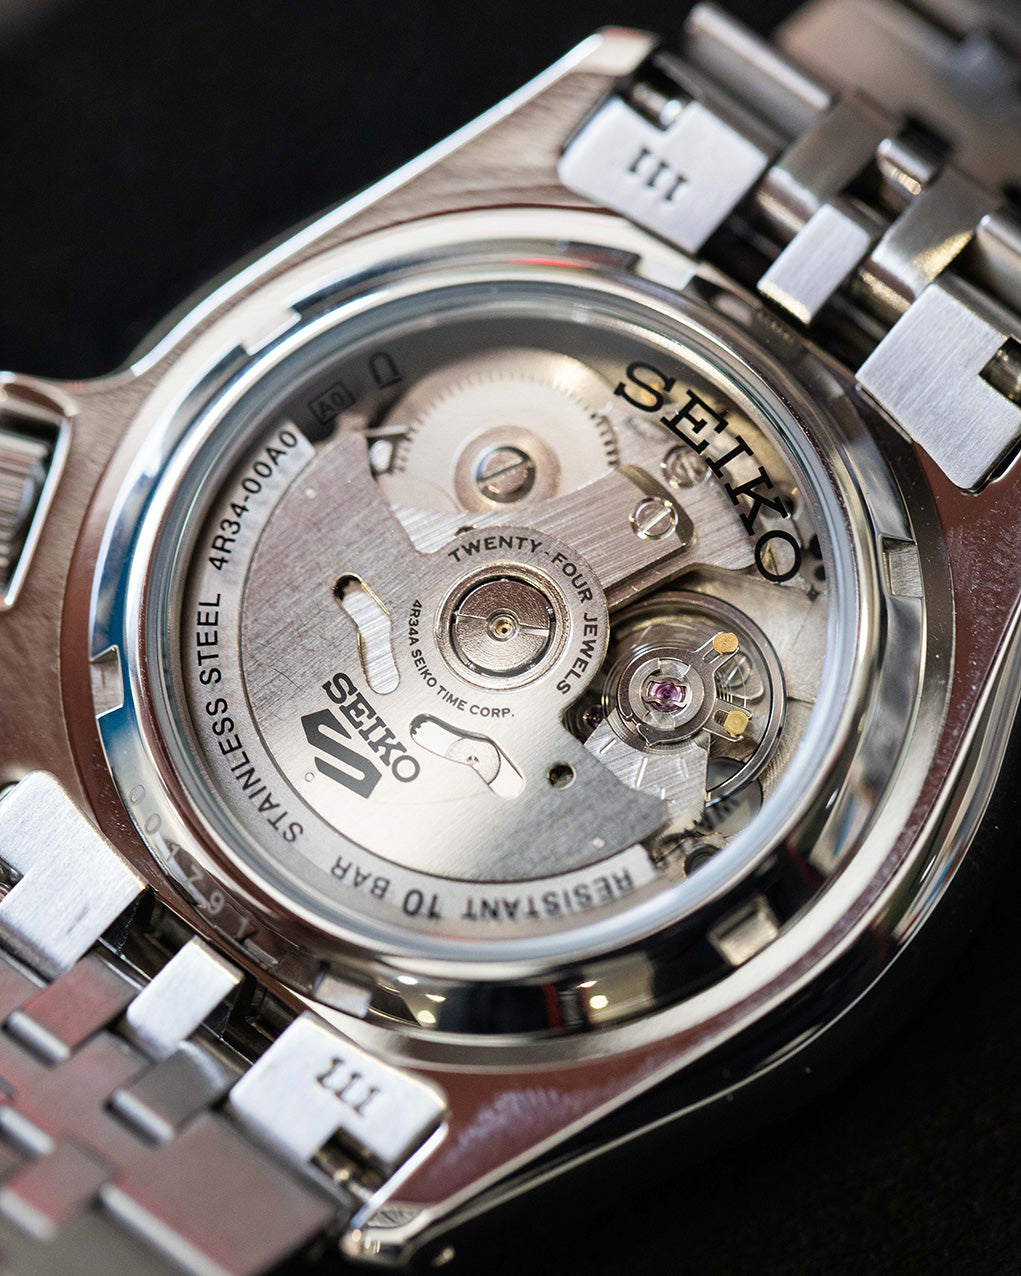 Seiko GMT See-through back. Automatic movement on display against black background. 